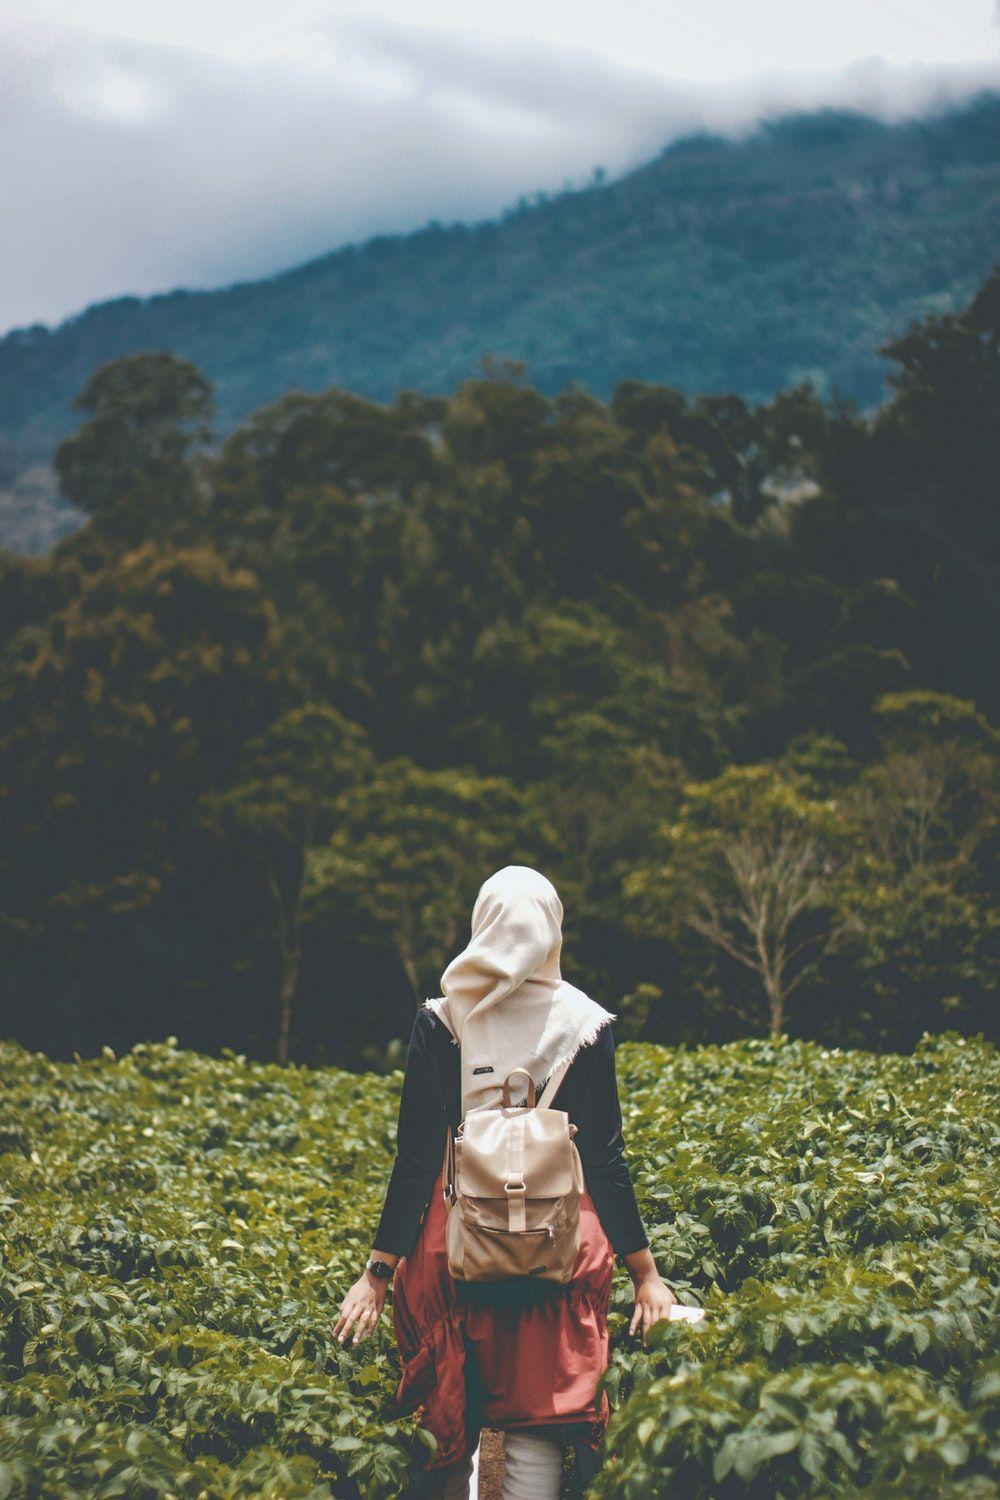 Hijab Picture [HD]. Download Free Image